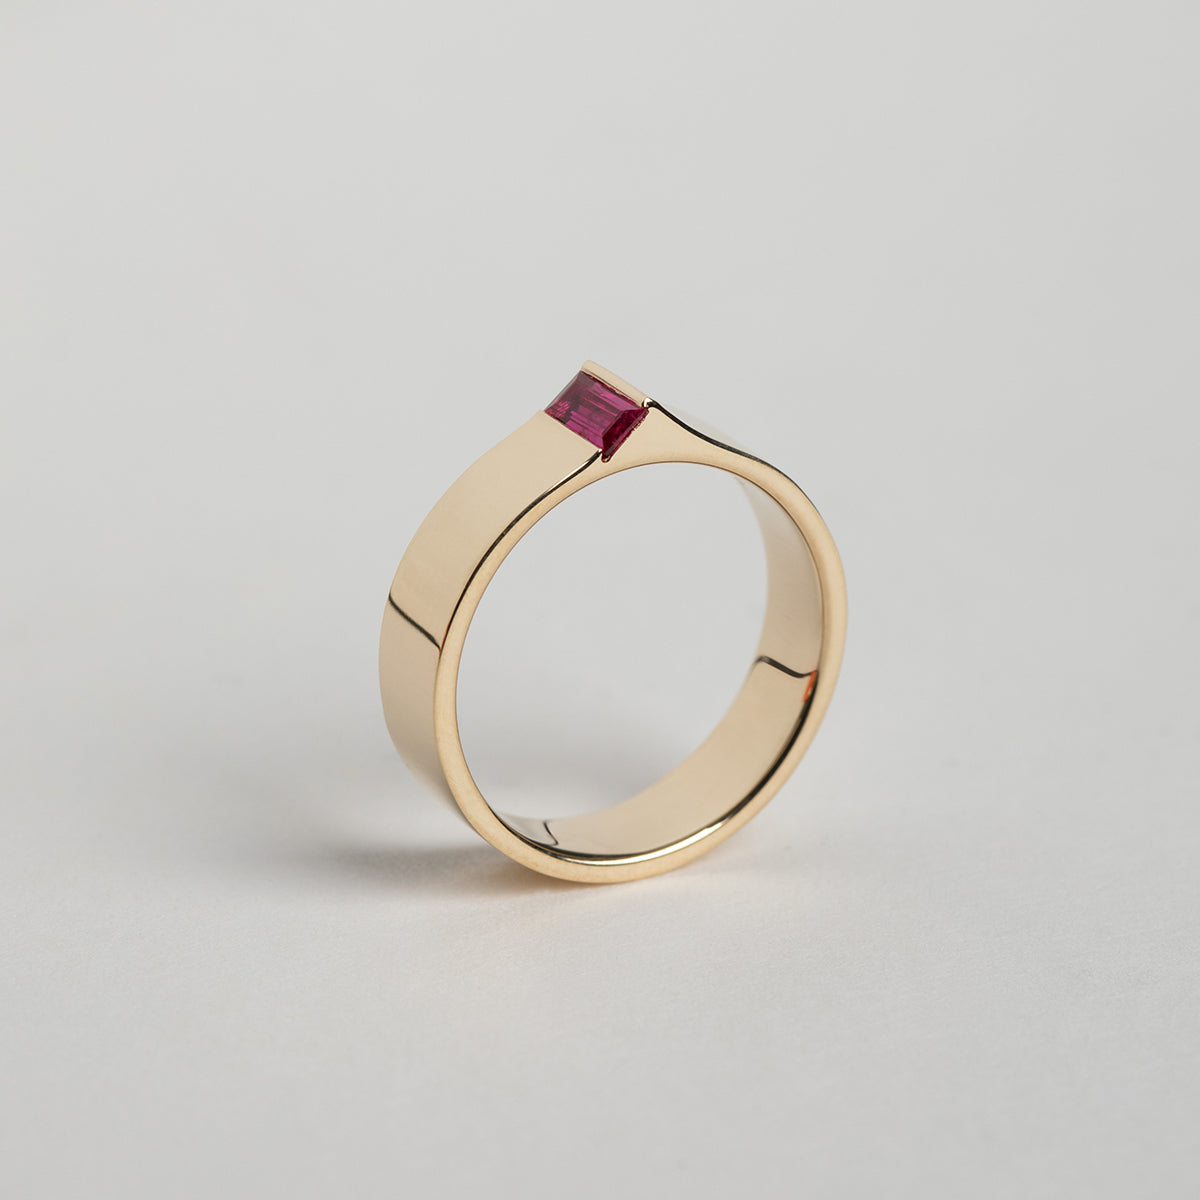 Cool Braga Ring in 14 karat yellow gold set with a baguette cut precious ruby gemstone by SHW Fine Jewelry made in NYC